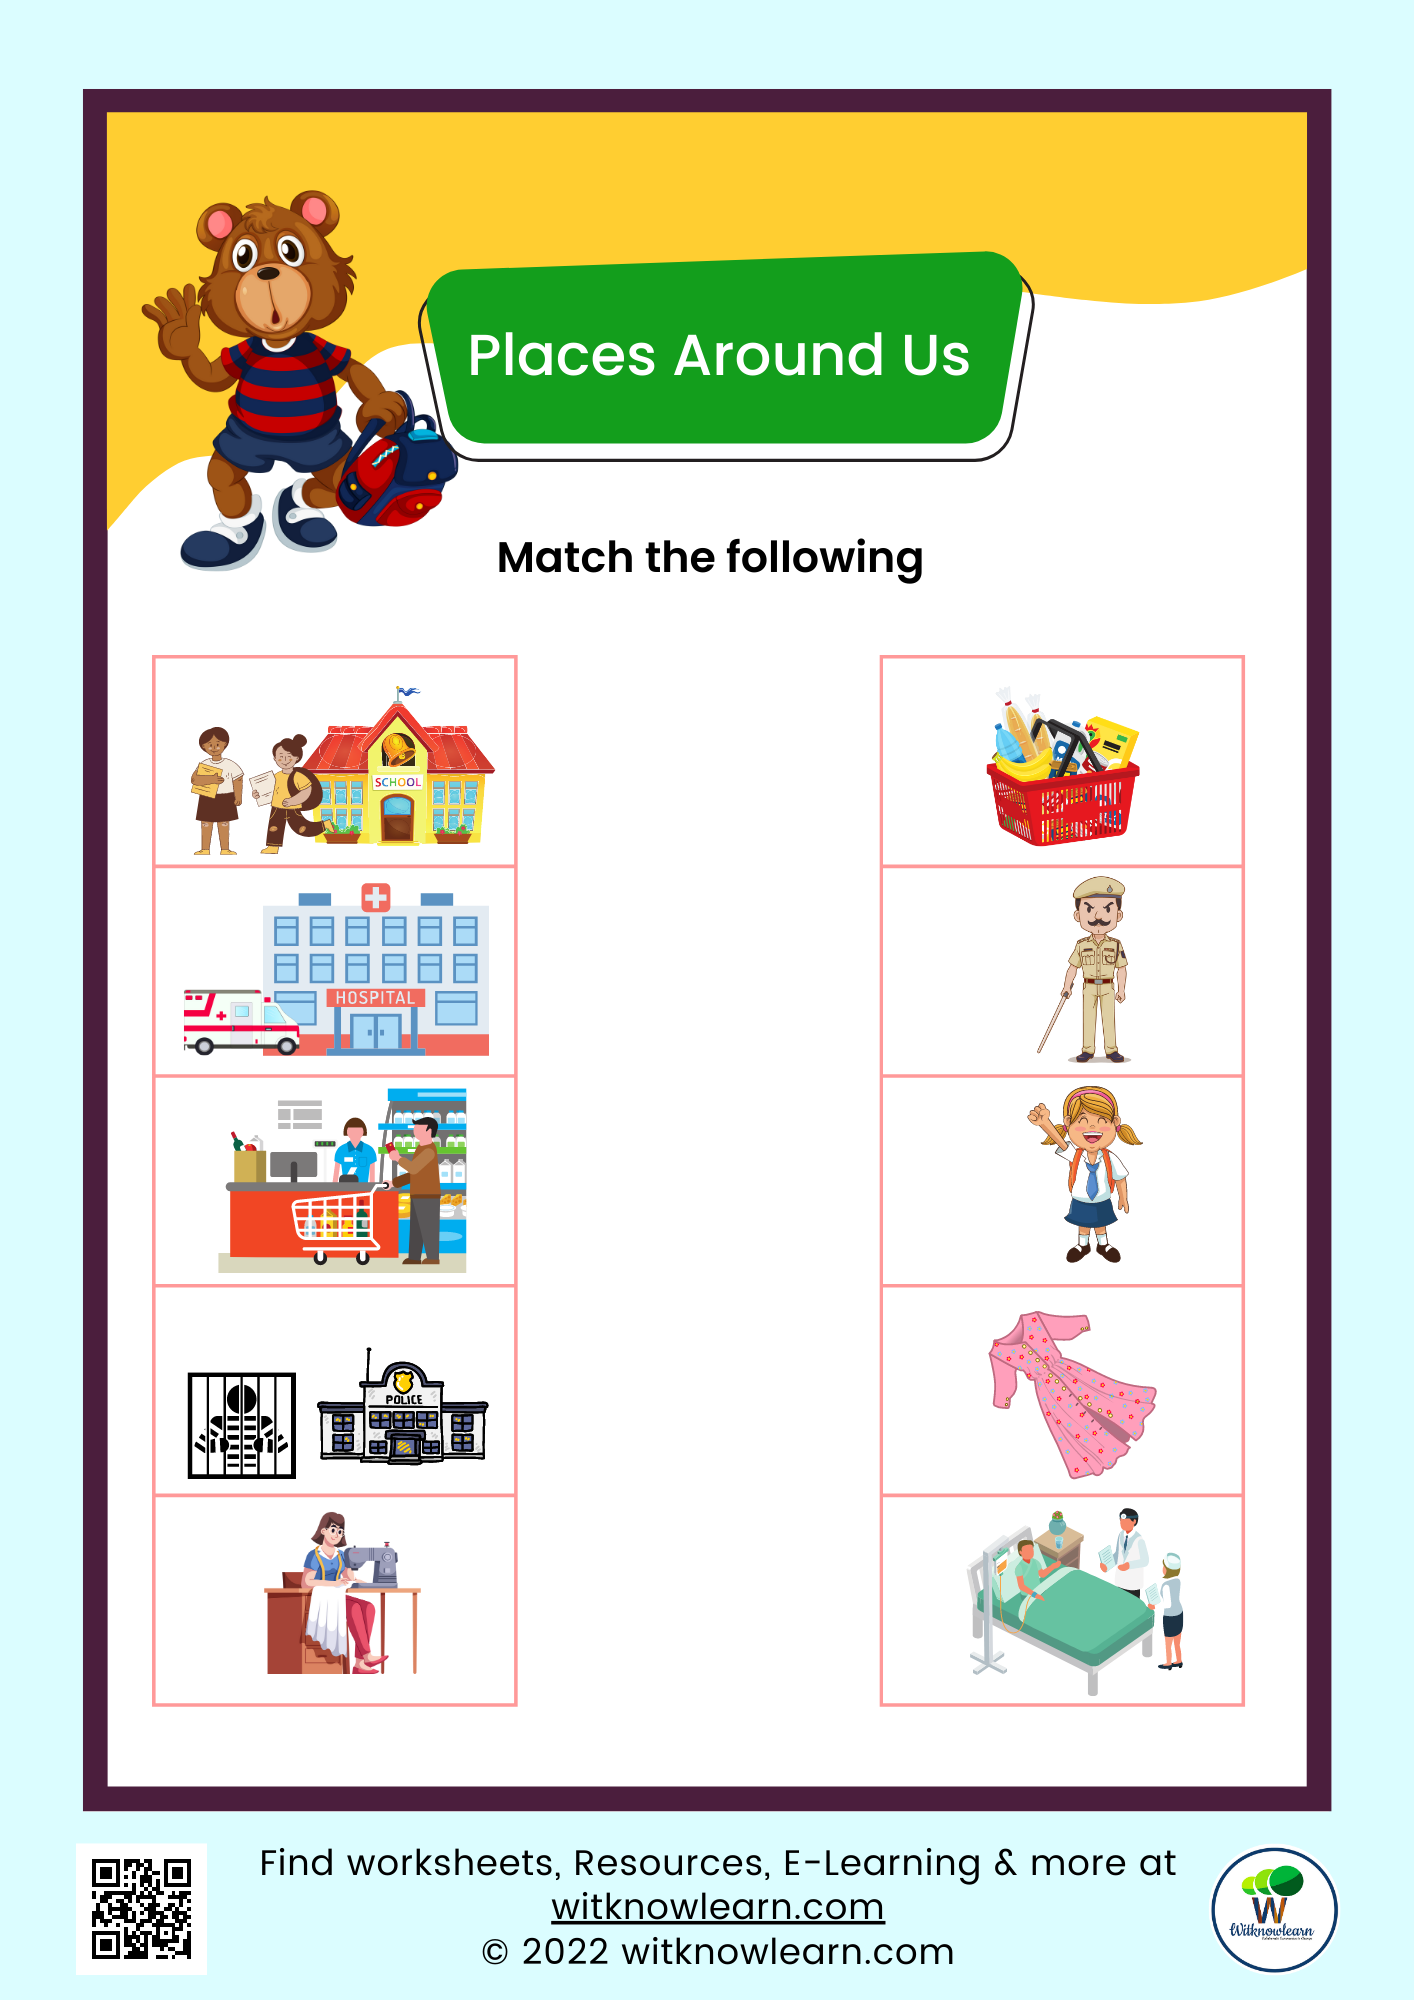 Worksheet On Places Around Us For Preschoolers Download Now 0 2023 27 01 111038 